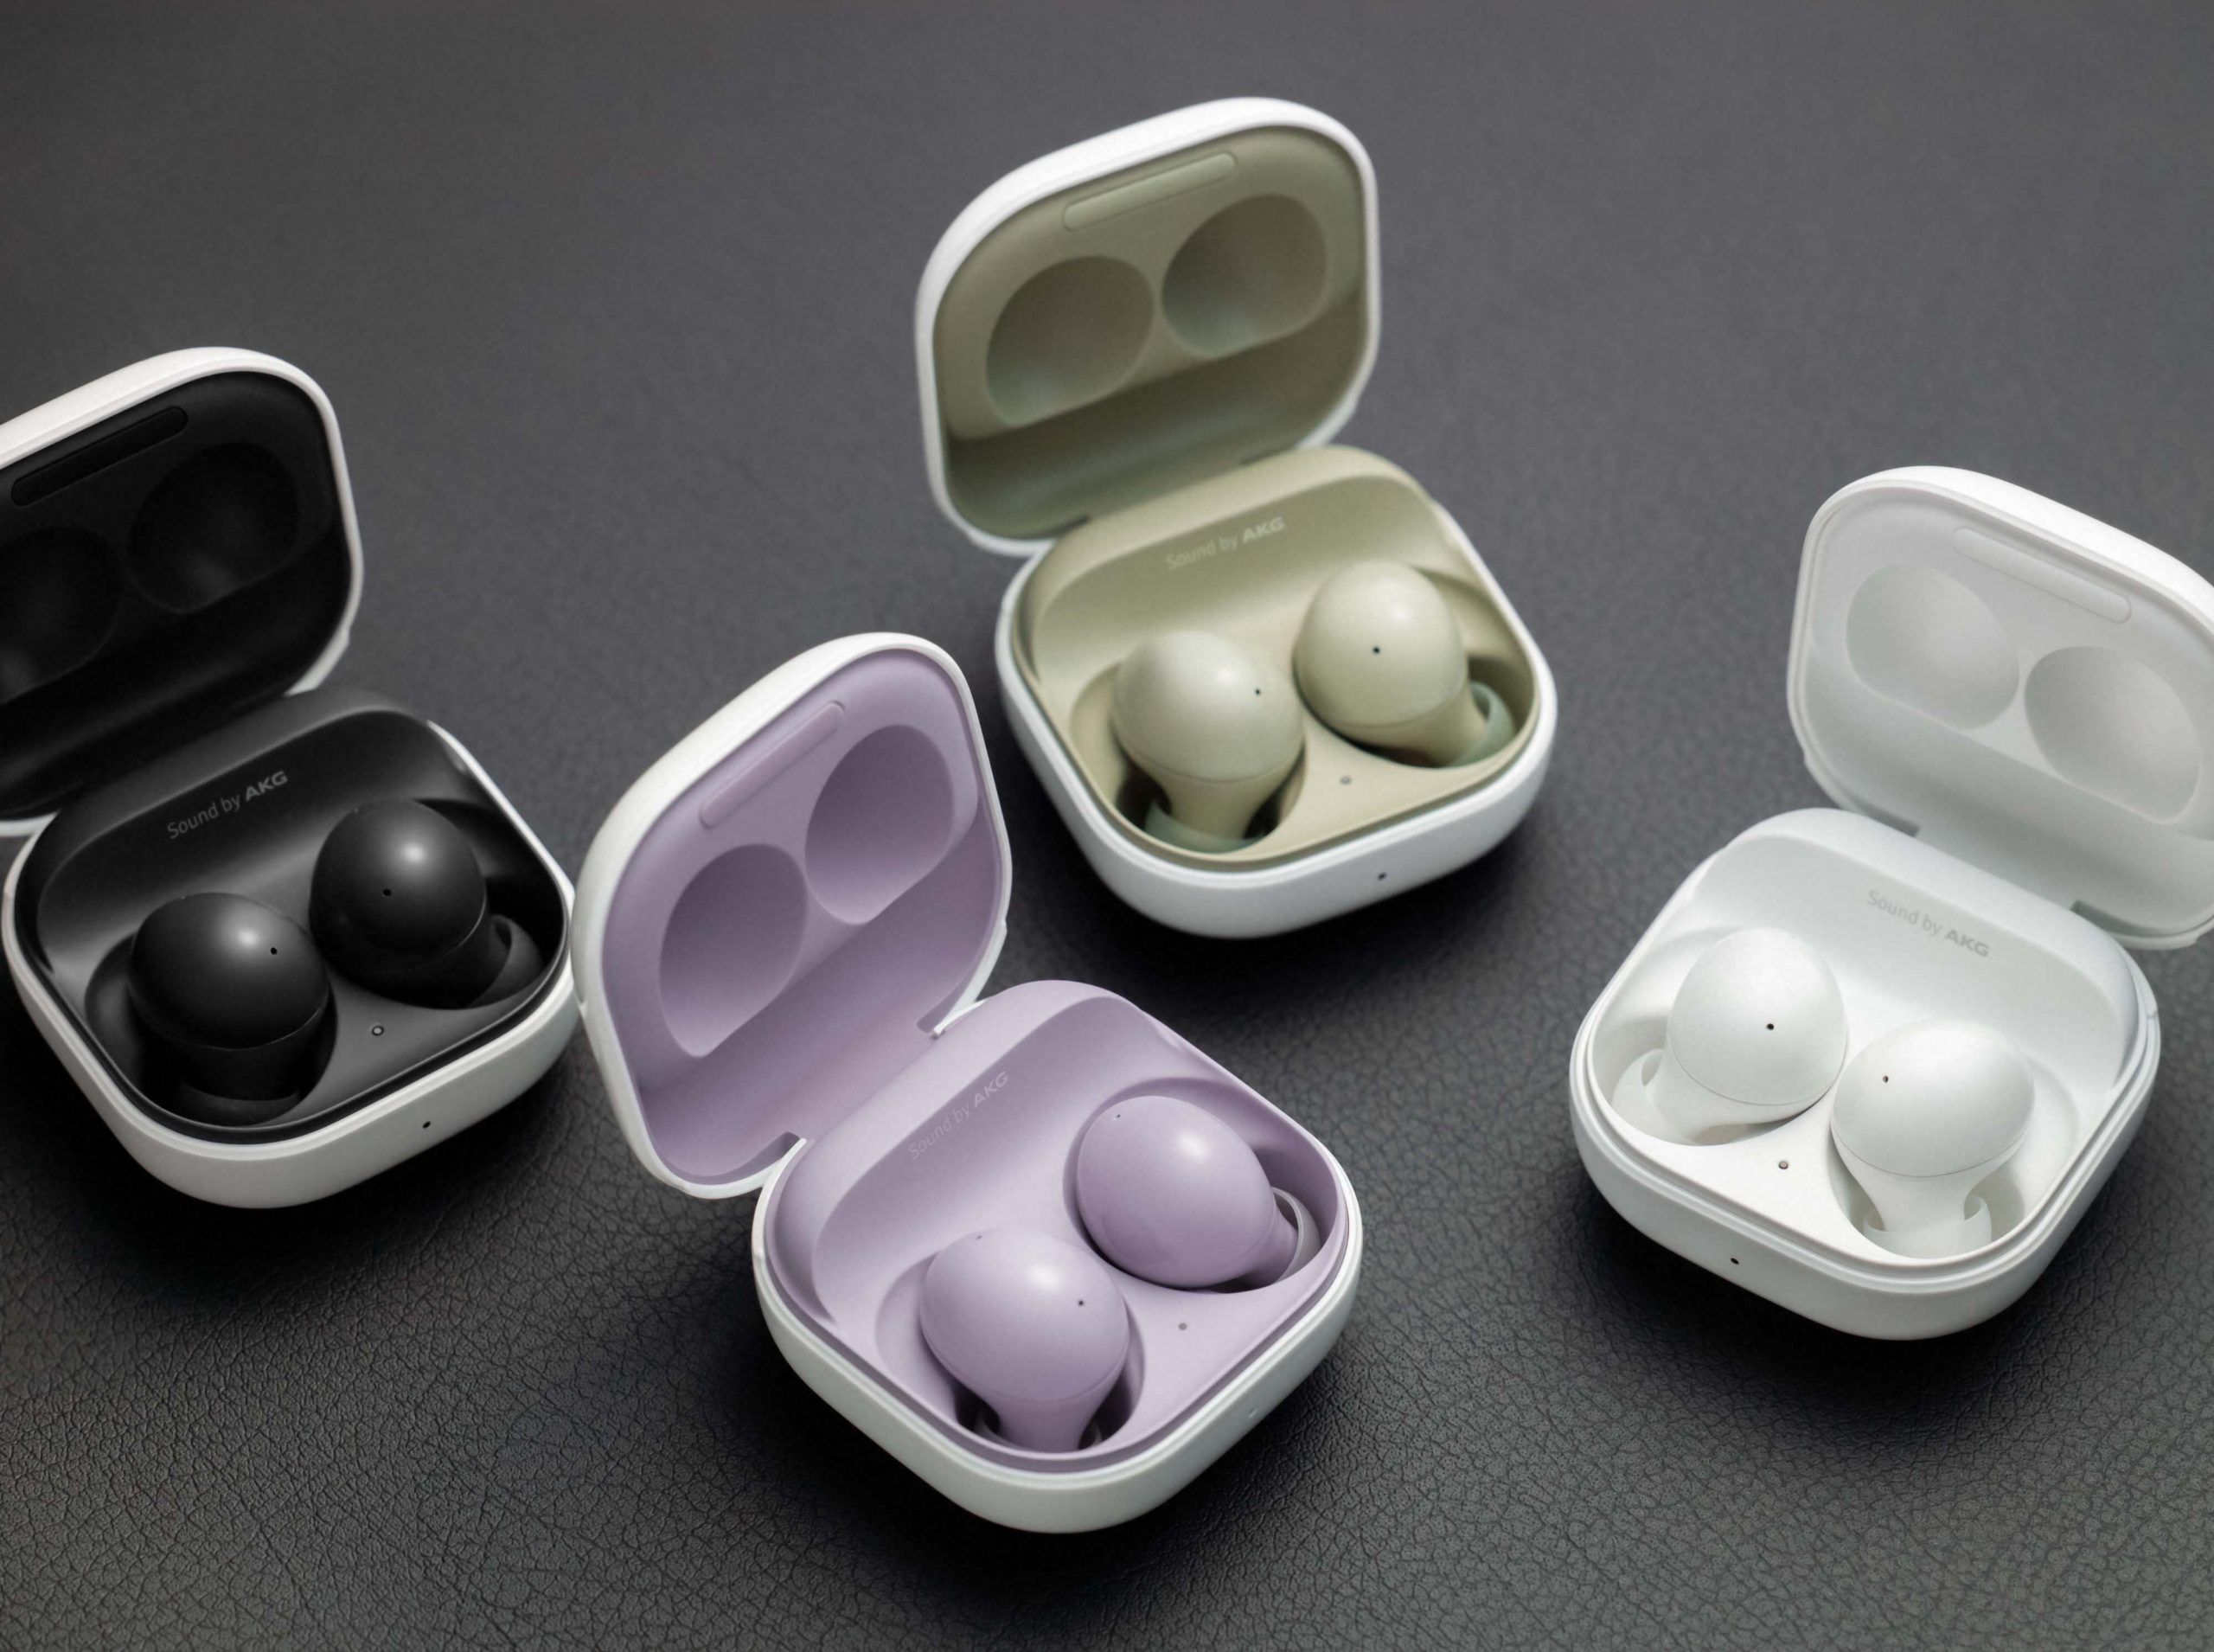 Four Galaxy Buds 2 with their lids open, one in each color available 